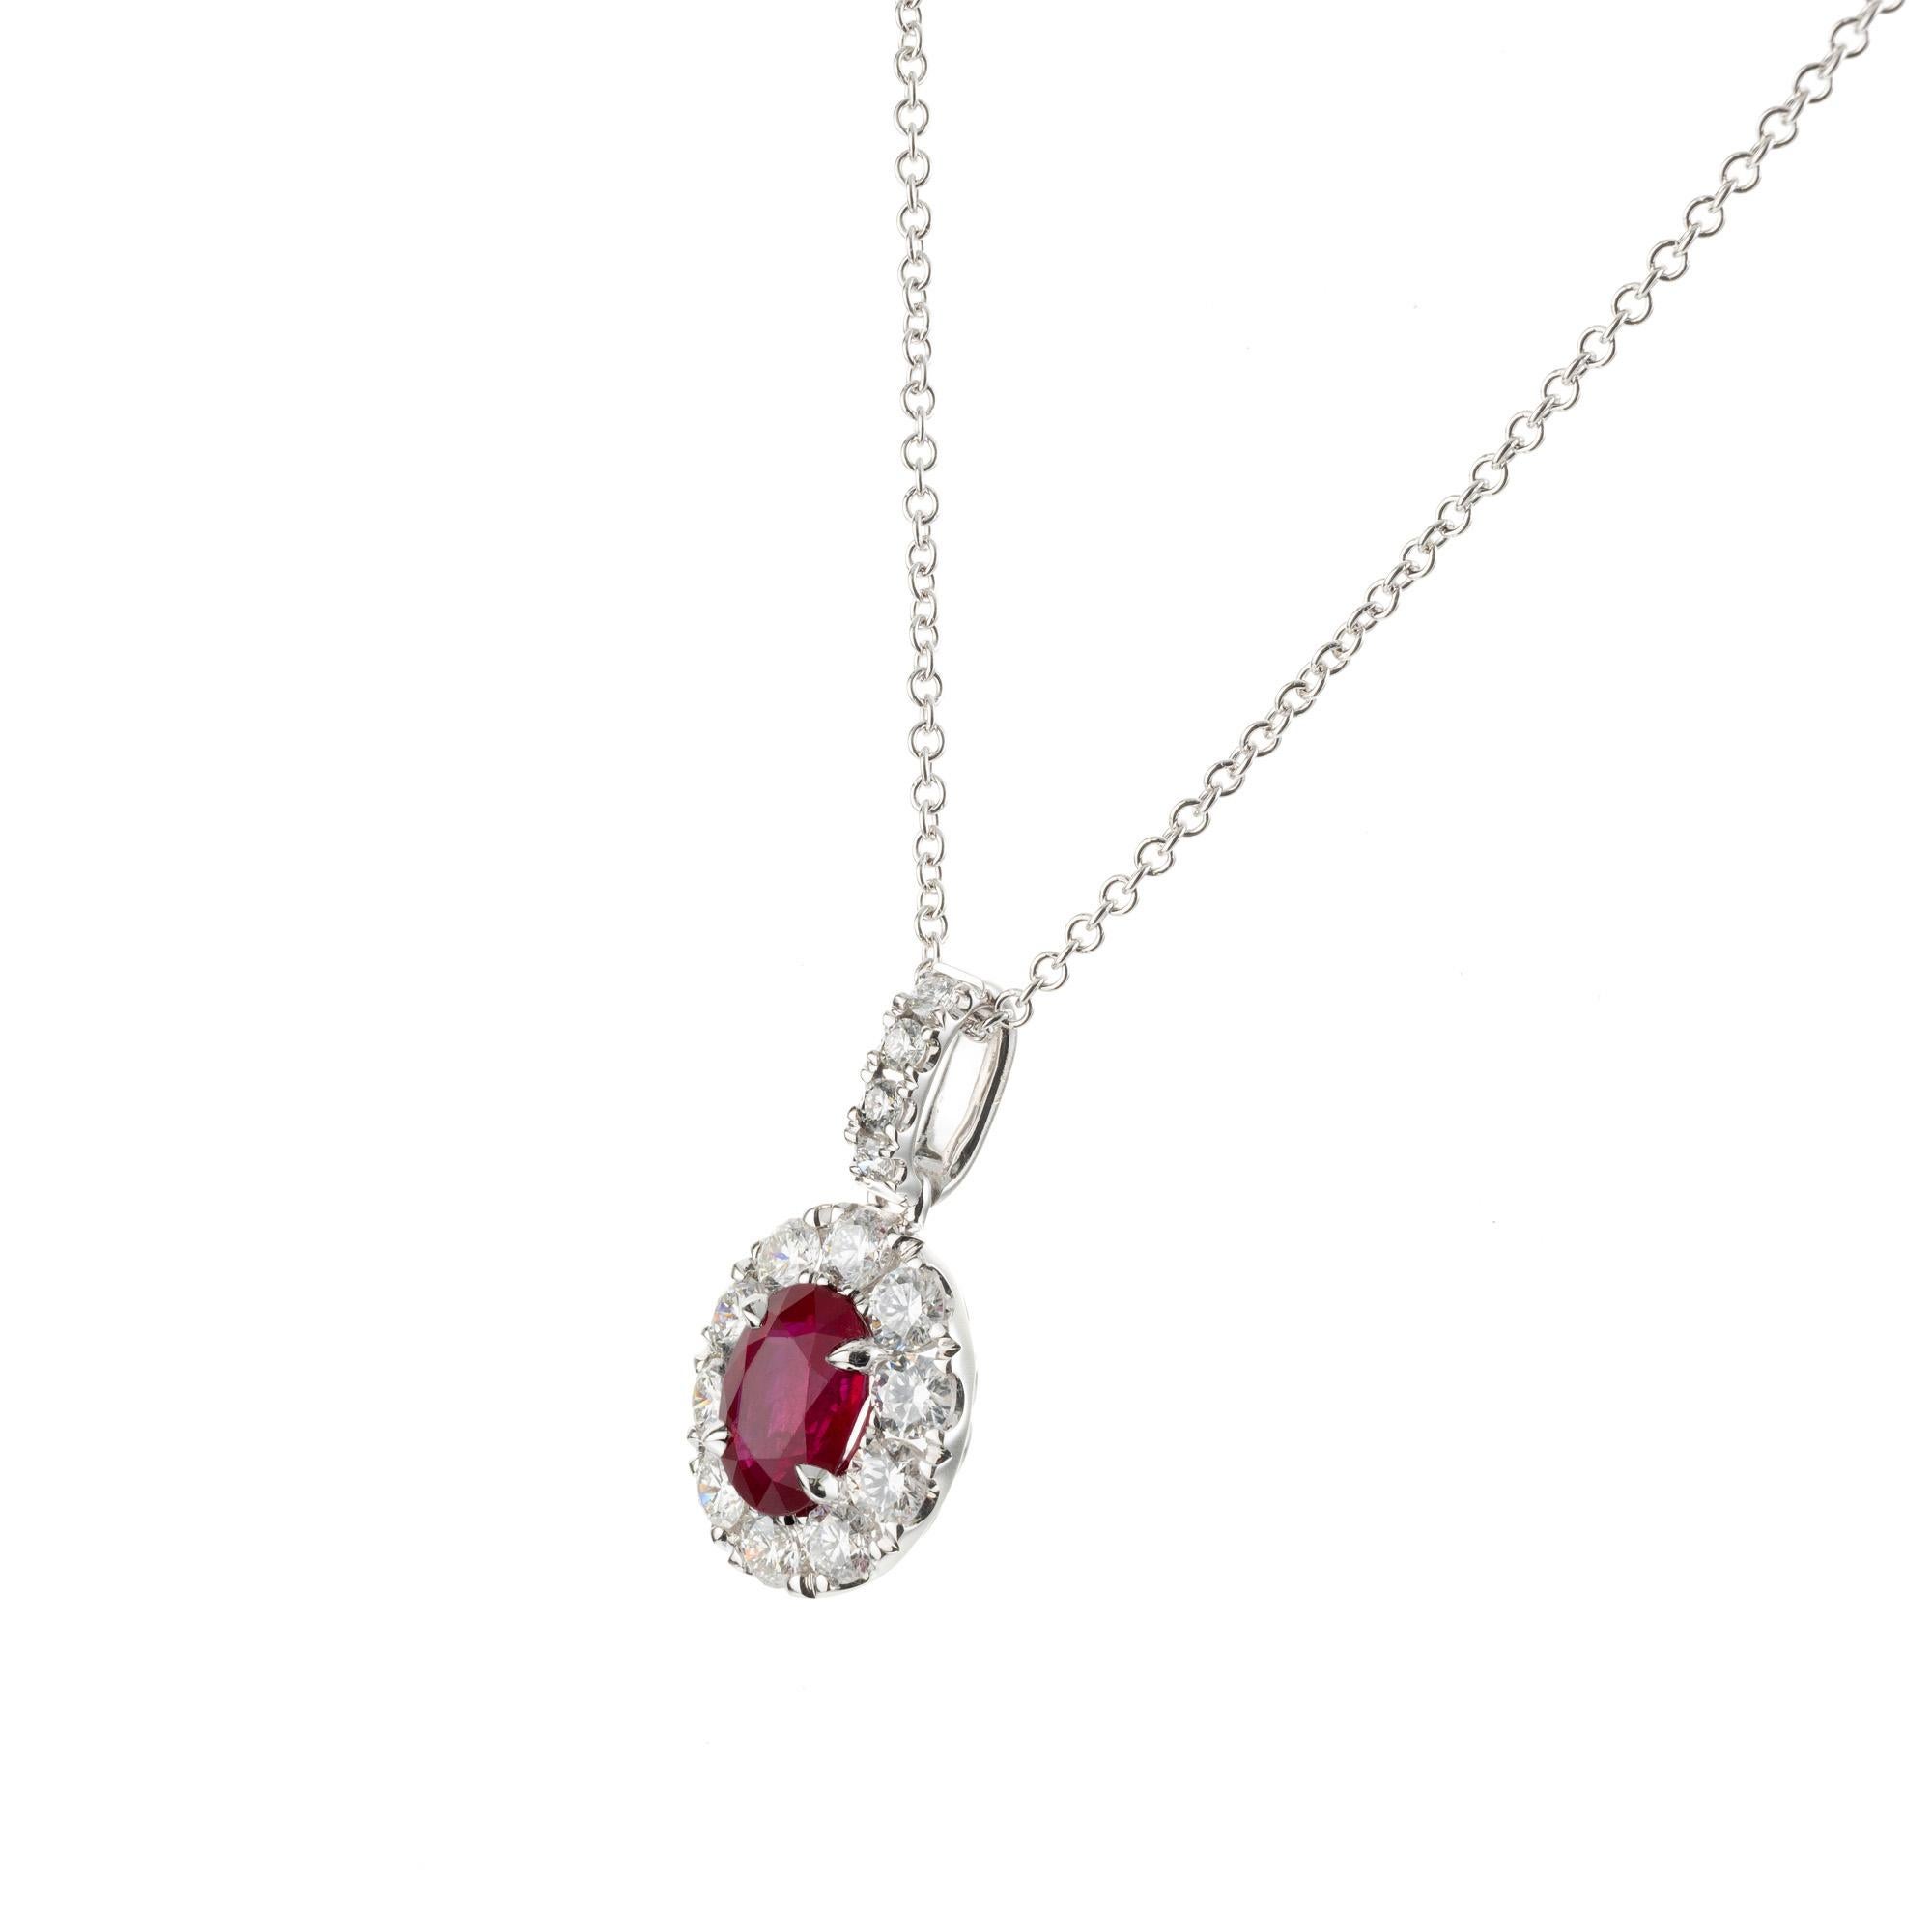 Oval Cut Peter Suchy GIA Certified 1.32 Carat Ruby Diamond White Gold Pendant Necklace For Sale